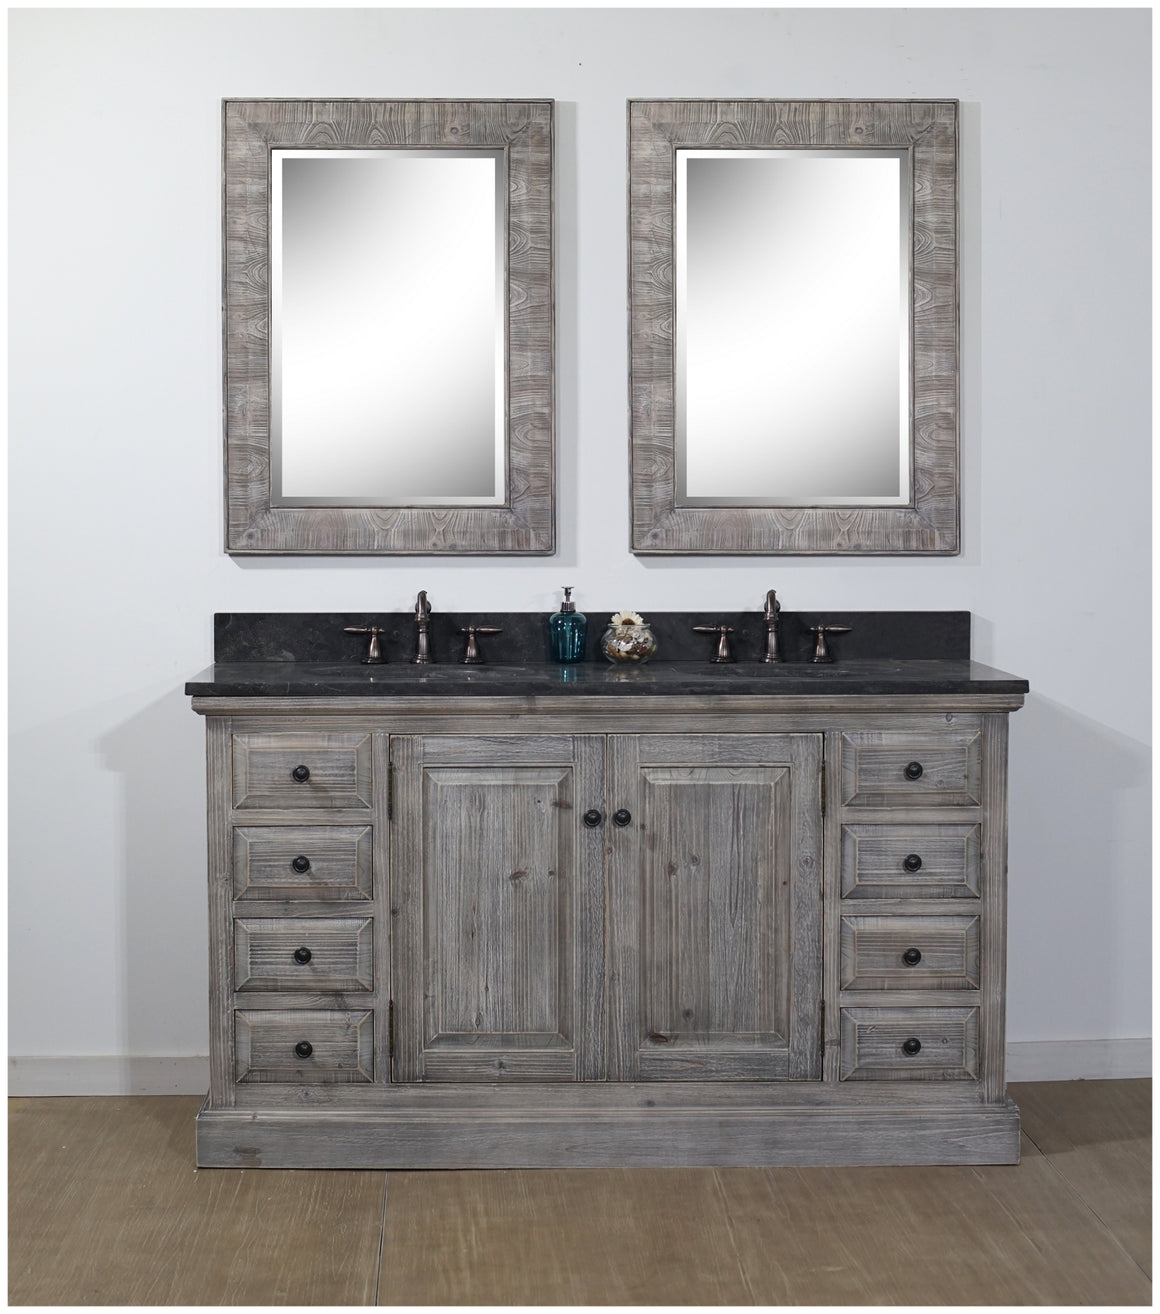 60" RUSTIC SOLID FIR DOUBLE SINK VANITY IN GREY DRIFTWOOD WITH LIMESTONE TOP-NO FAUCET